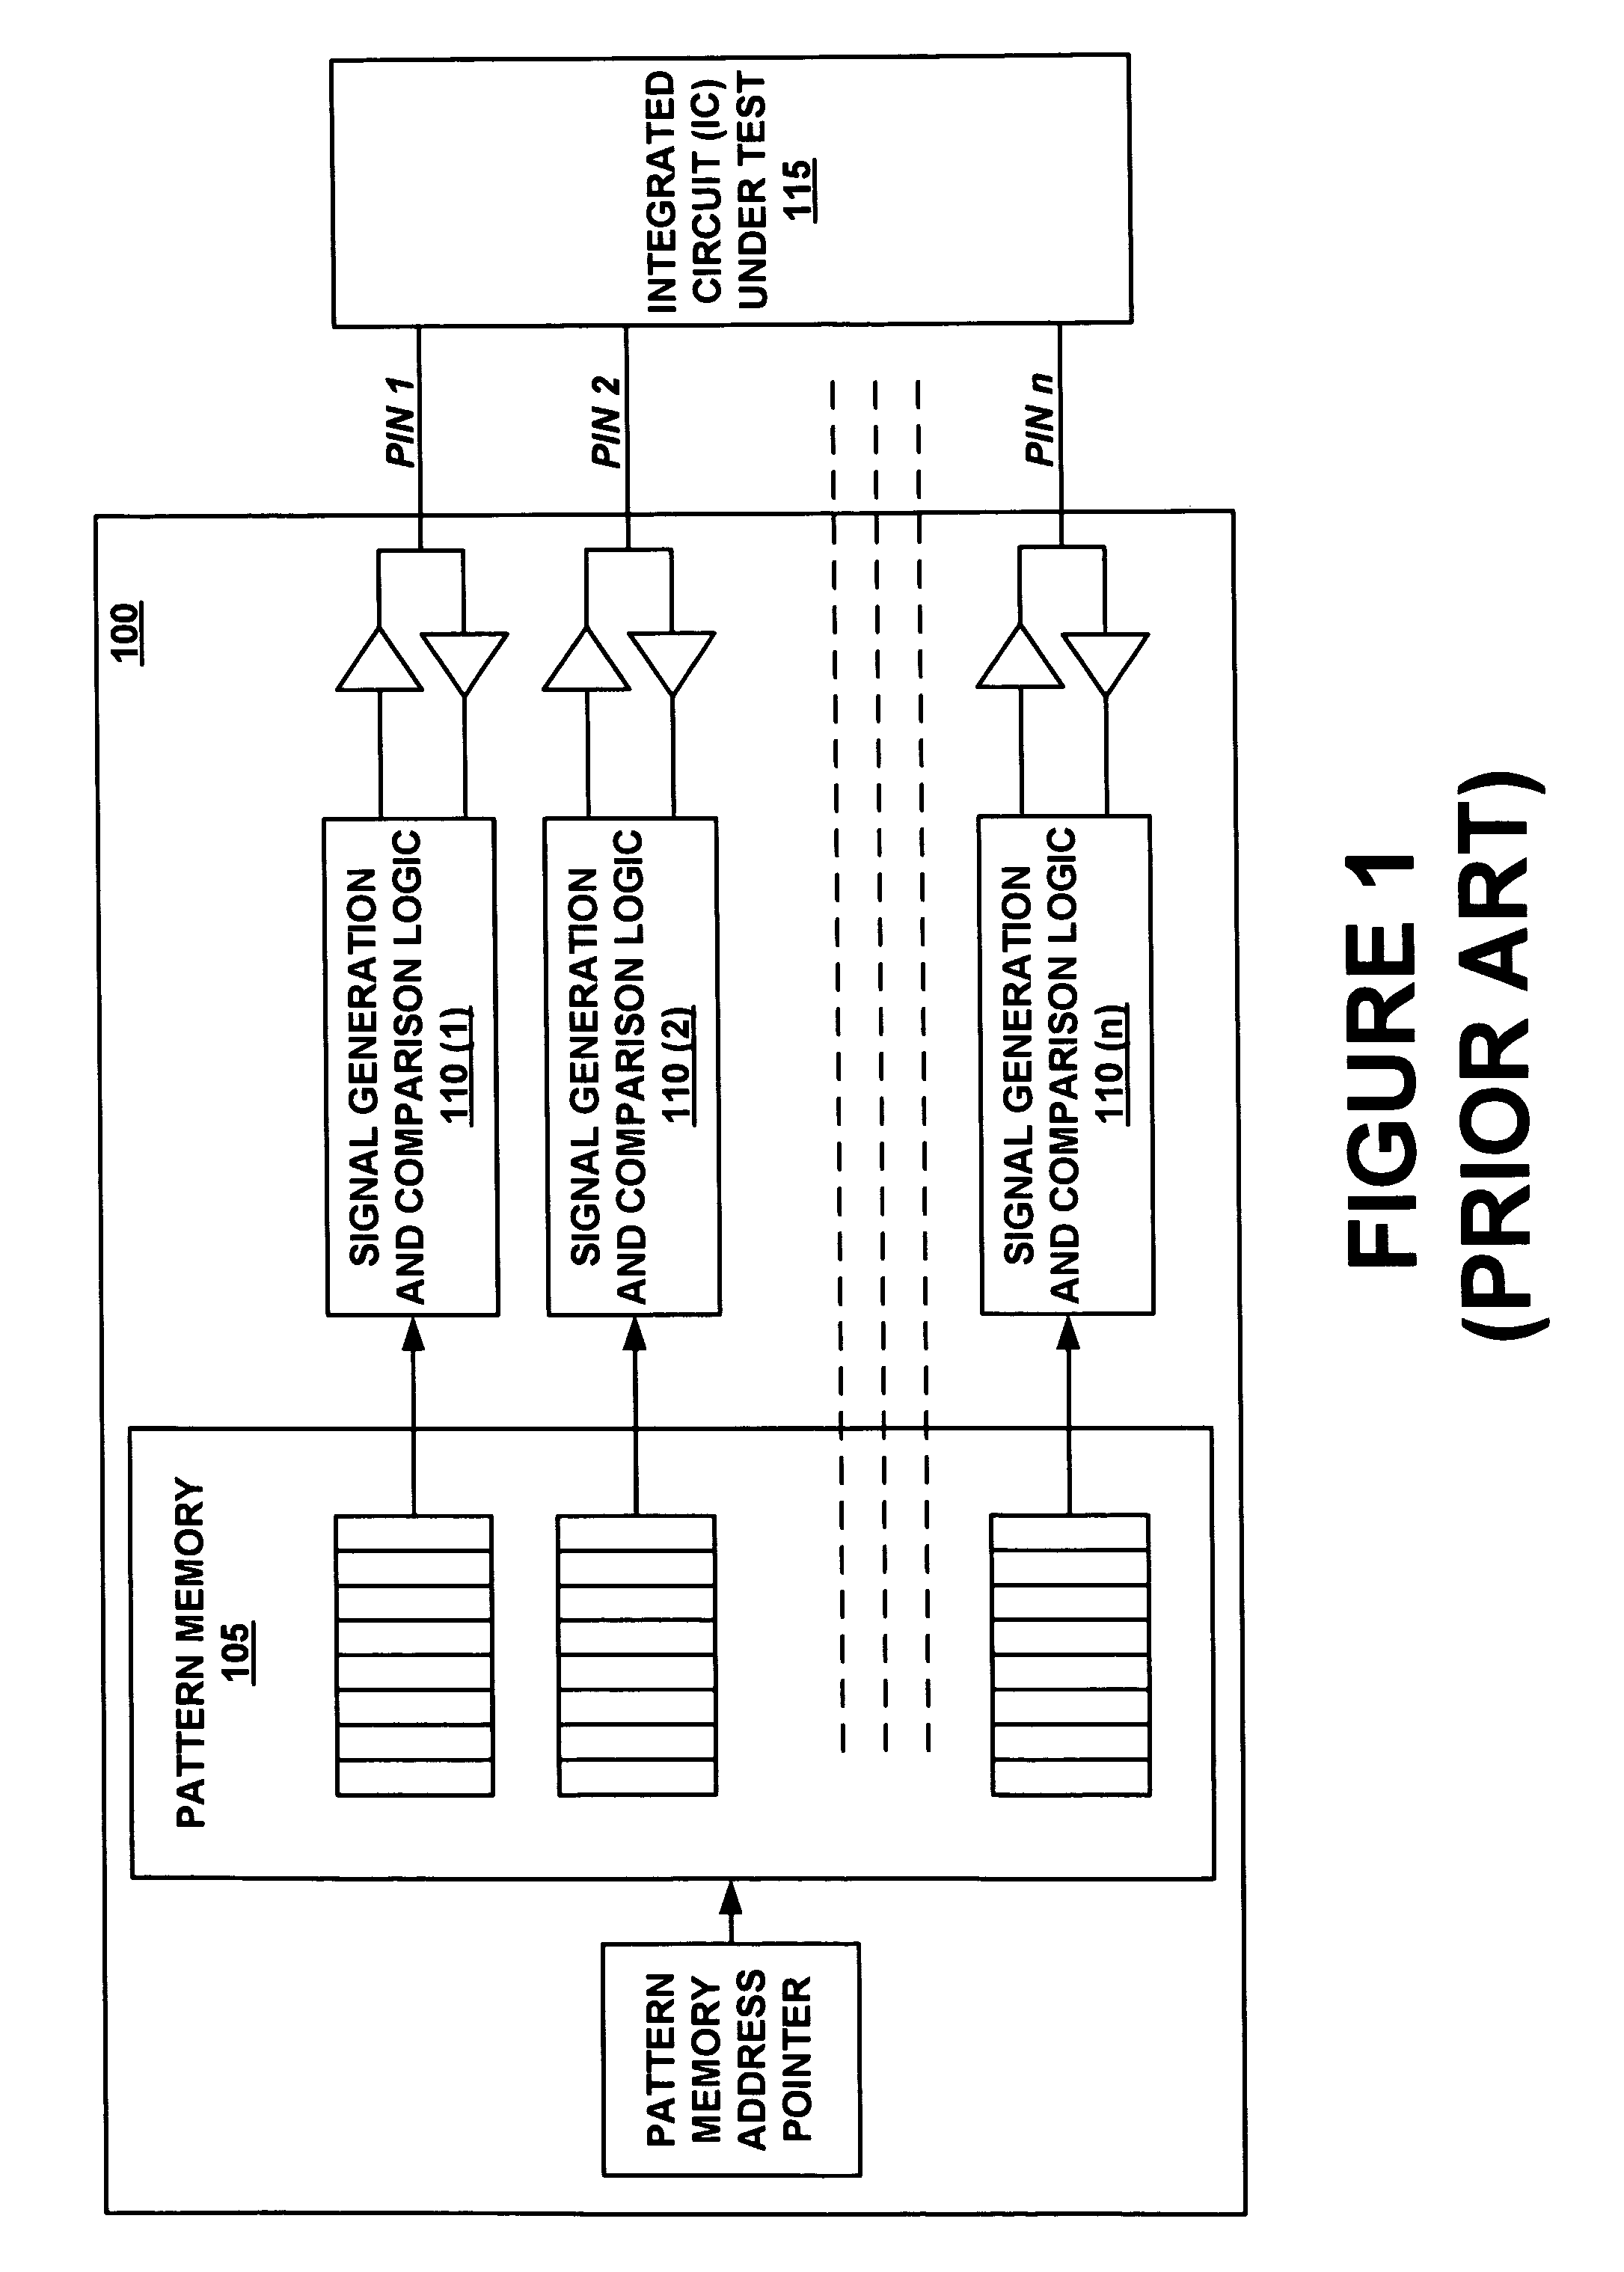 System for dynamic re-allocation of test pattern data for parallel and serial test data patterns